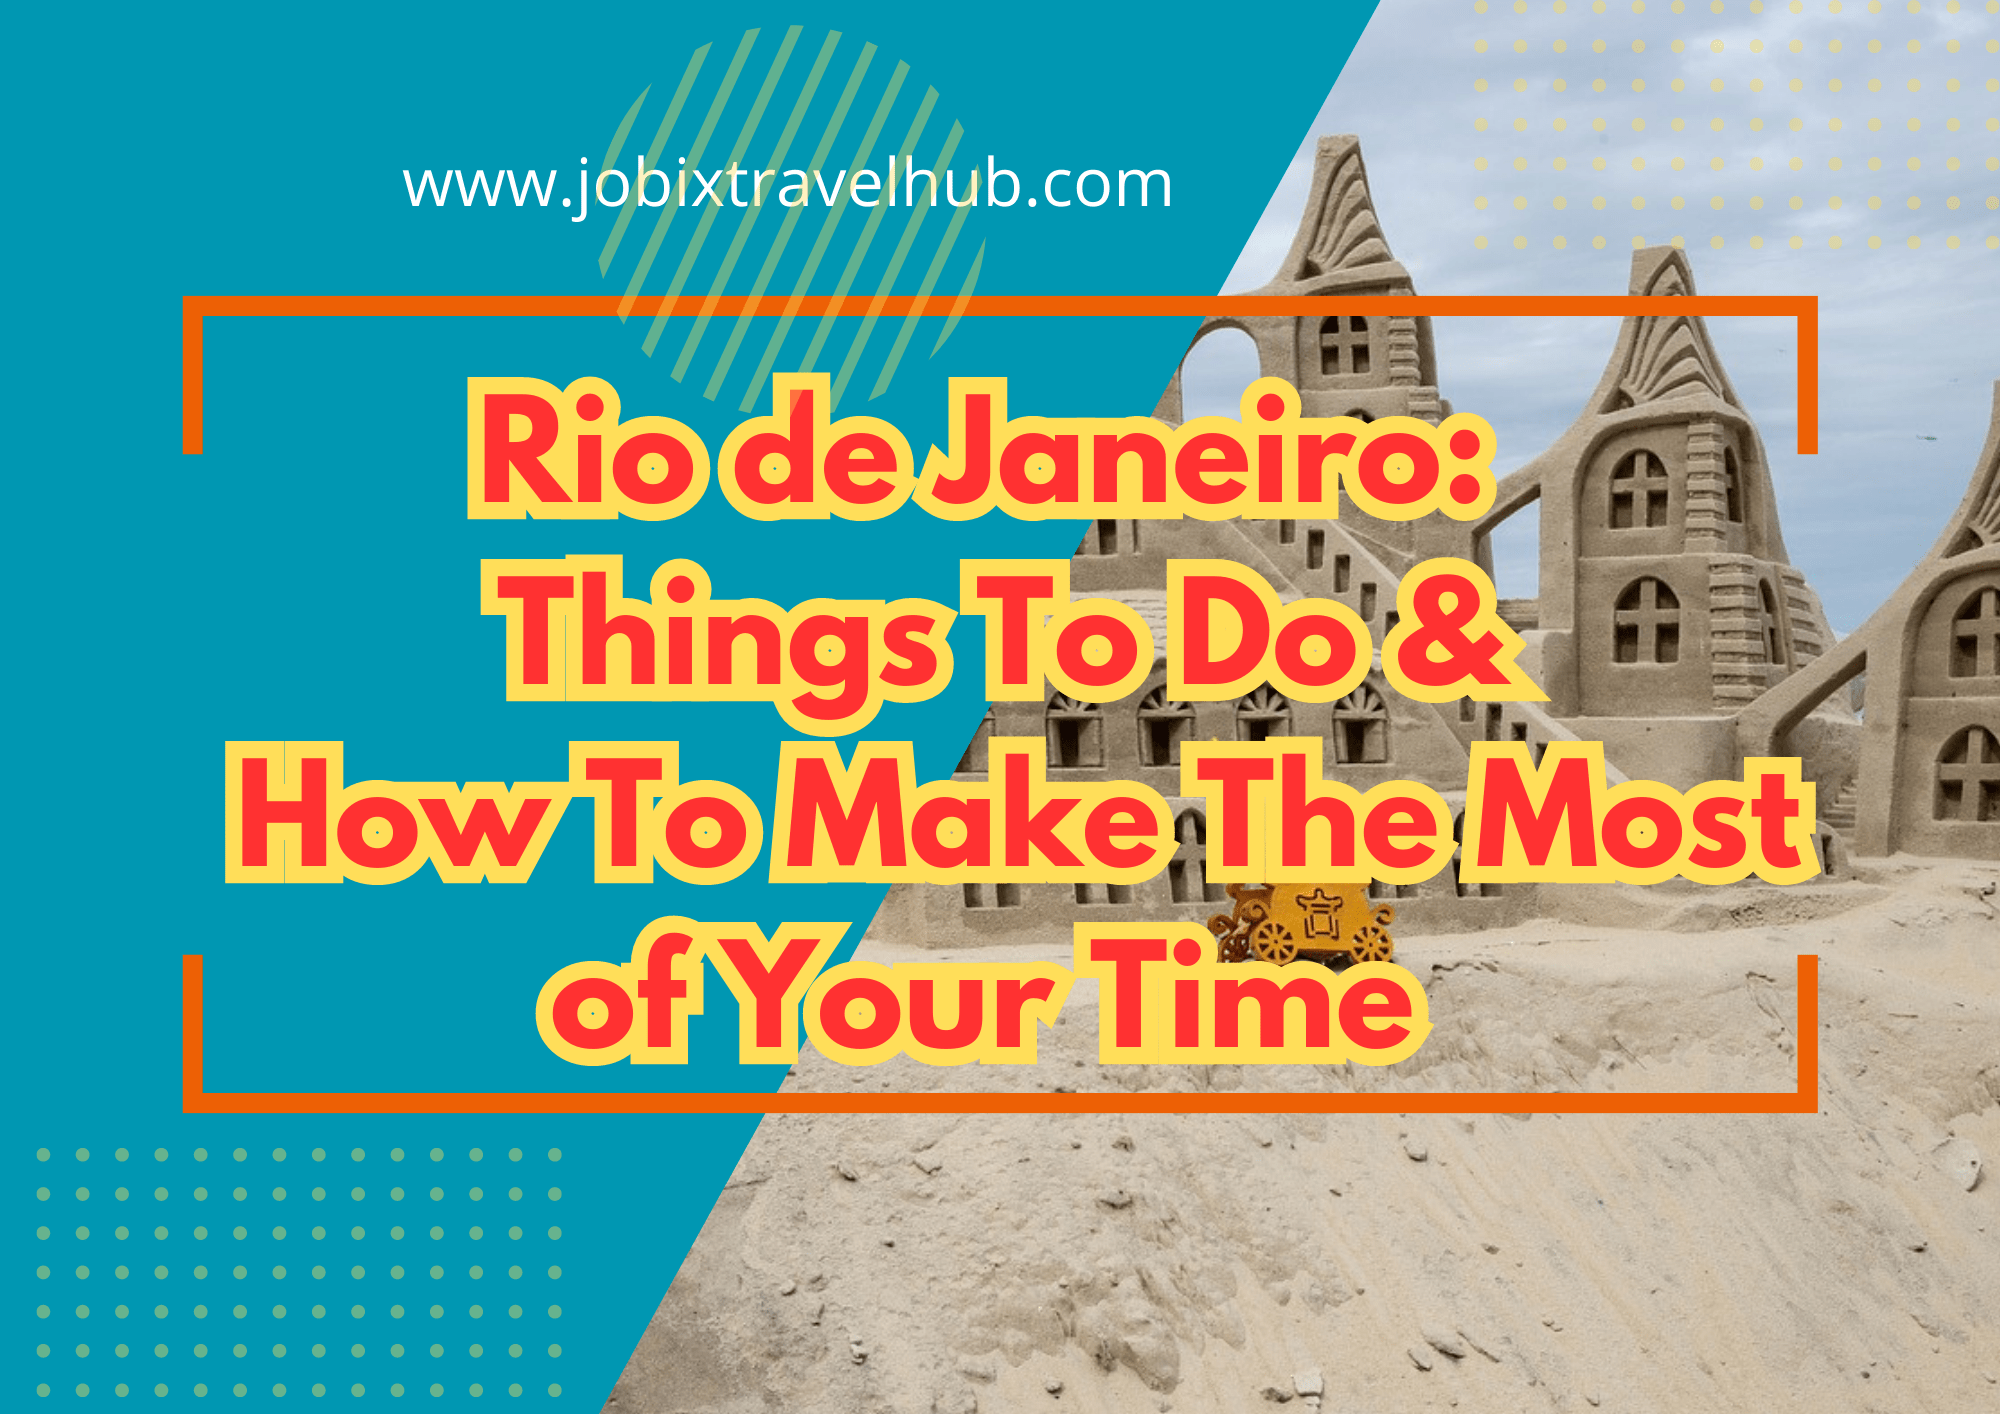 Rio de Janeiro: Things To Do & How To Make The Most of Your Time